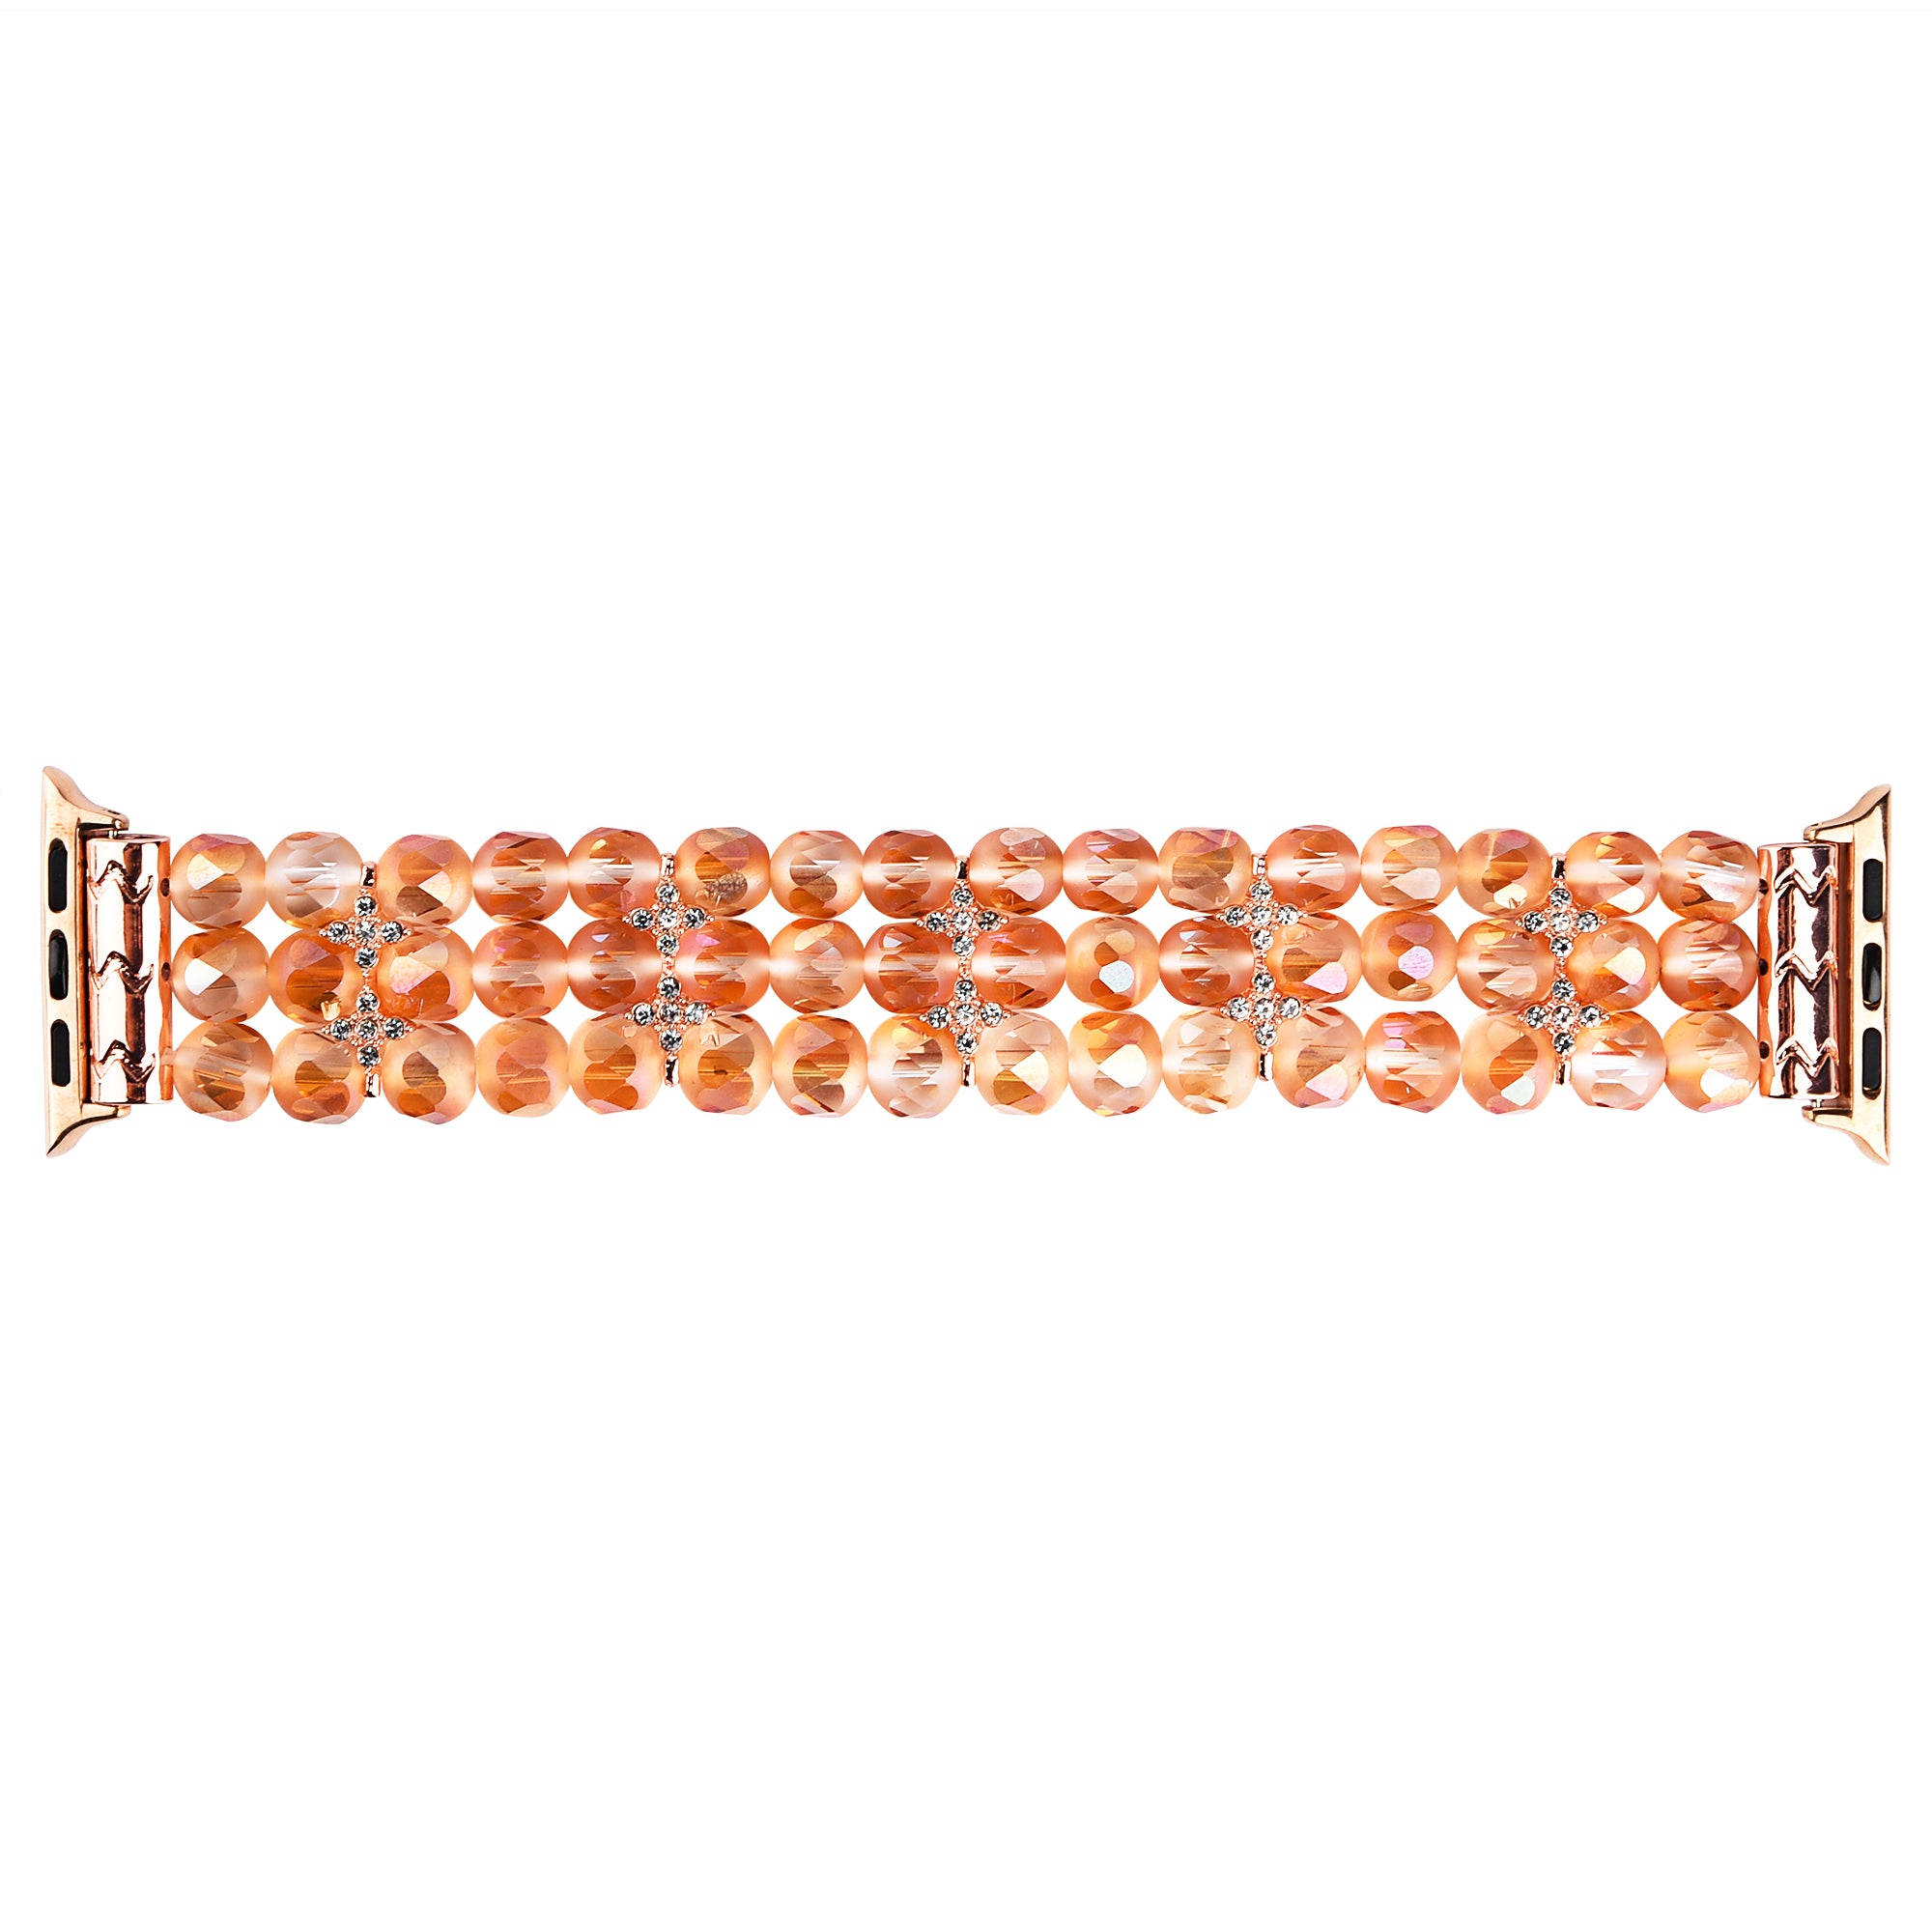 Flower Shape Decor Crystal Beads Design Replacement Watch Strap Wrist Band for Apple Watch Series 8 41mm / Series 7 41mm / Series 6 / 5 / 4 / SE / SE(2022) 40mm / Watch Series 1 / 2 / 3 38mm - Orange